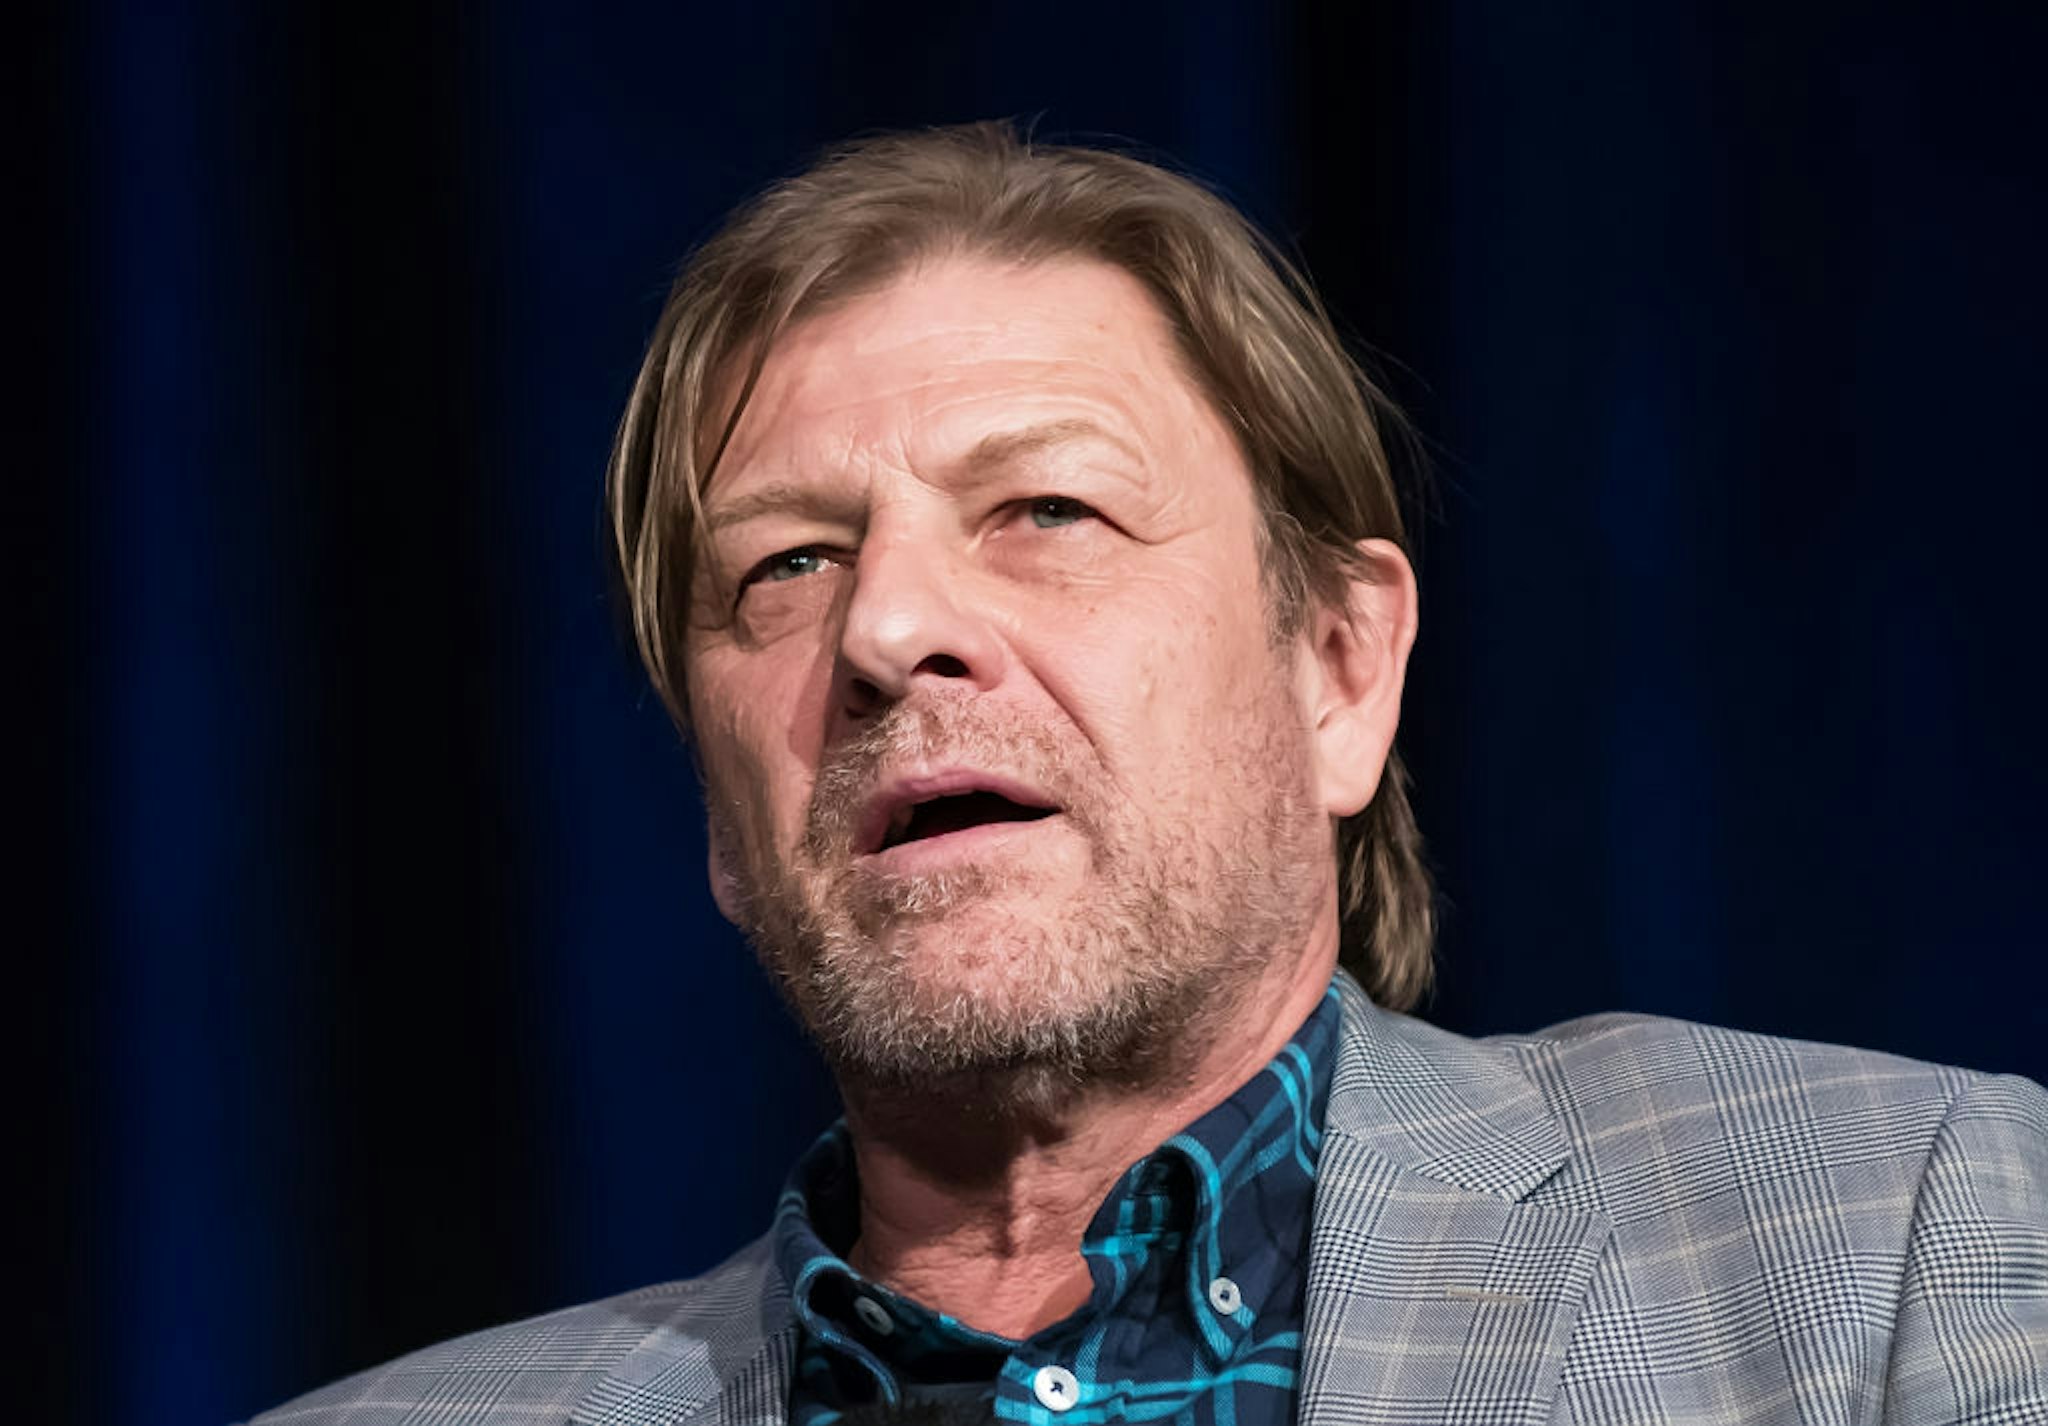 PHILADELPHIA, PA - MAY 19: Actor Sean Bean attends the 2018 Wizard World Comic Con at Pennsylvania Convention Center on May 19, 2018 in Philadelphia, Pennsylvania. (Photo by Gilbert Carrasquillo/Getty Images)